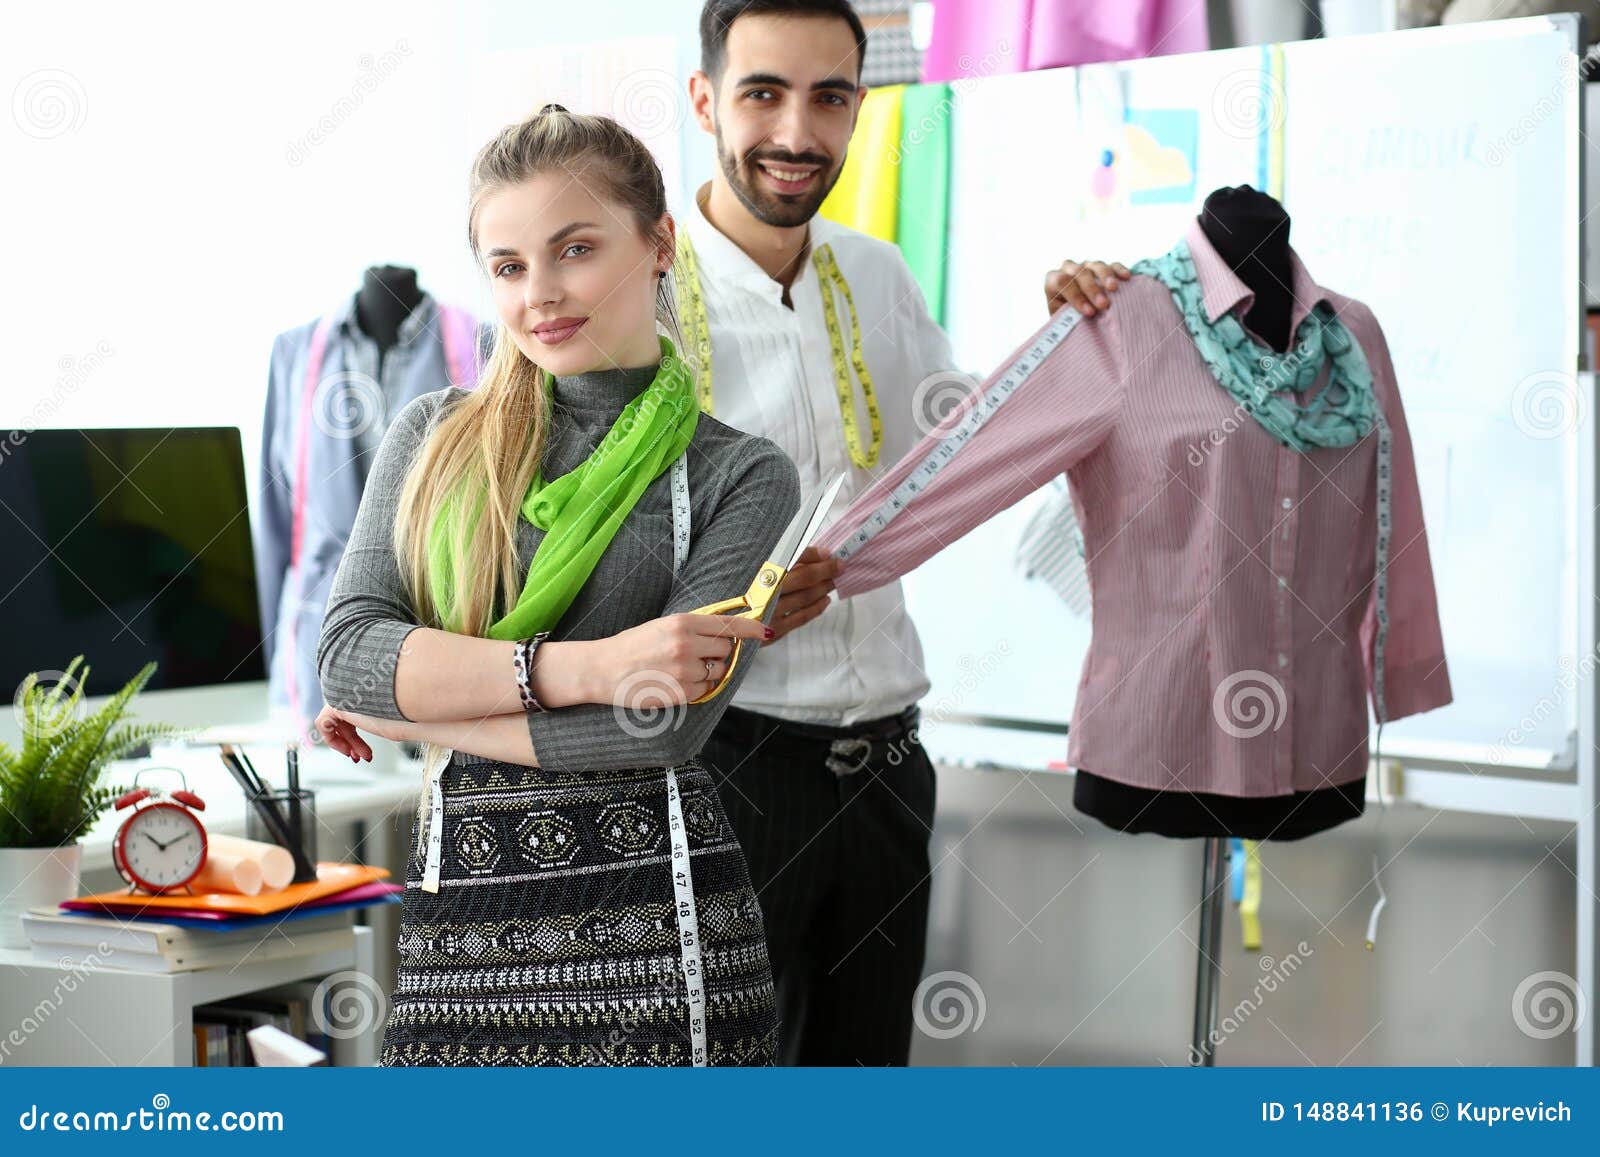 Dressmaking Exclusive Unique Clothes Creation Stock Photo - Image of ...